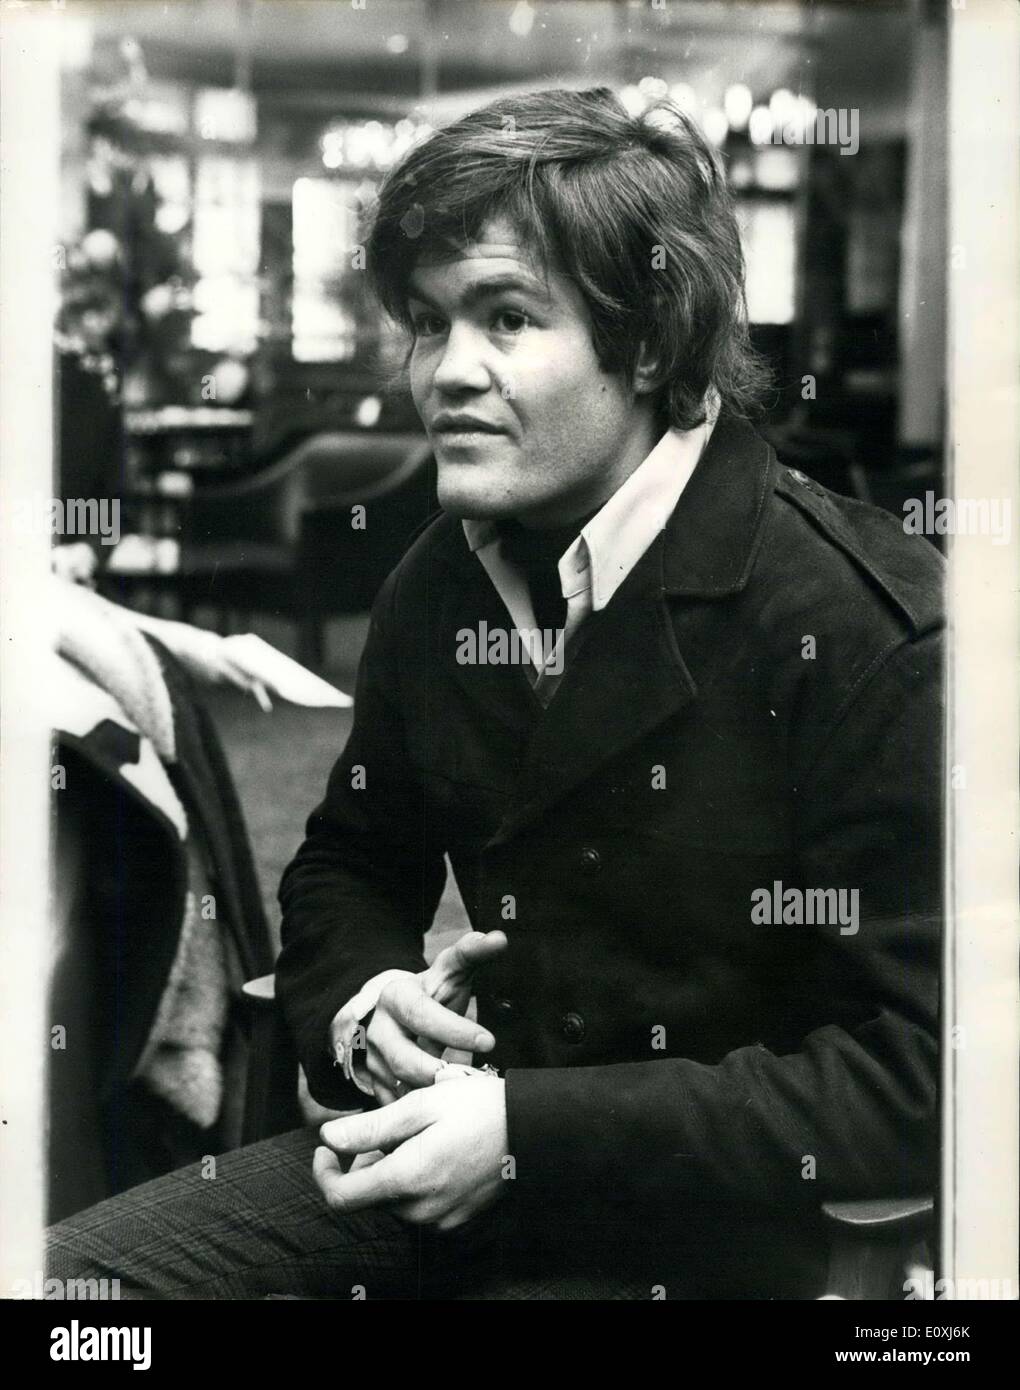 Feb. 07, 1967 - Micky Dolenz, the 21- year old drummer with American pop group the Monkees- arrived in London from New York yesterday on a five-day holiday. Micky's three Colleagues, Mike Nesmith, Peter Tork and Briton Davy Jones - are staying in New York while he visits London. Picture Shows: Micky Dolenz- of the Monkees - pictured at his hotel London Yesterday. Stock Photo